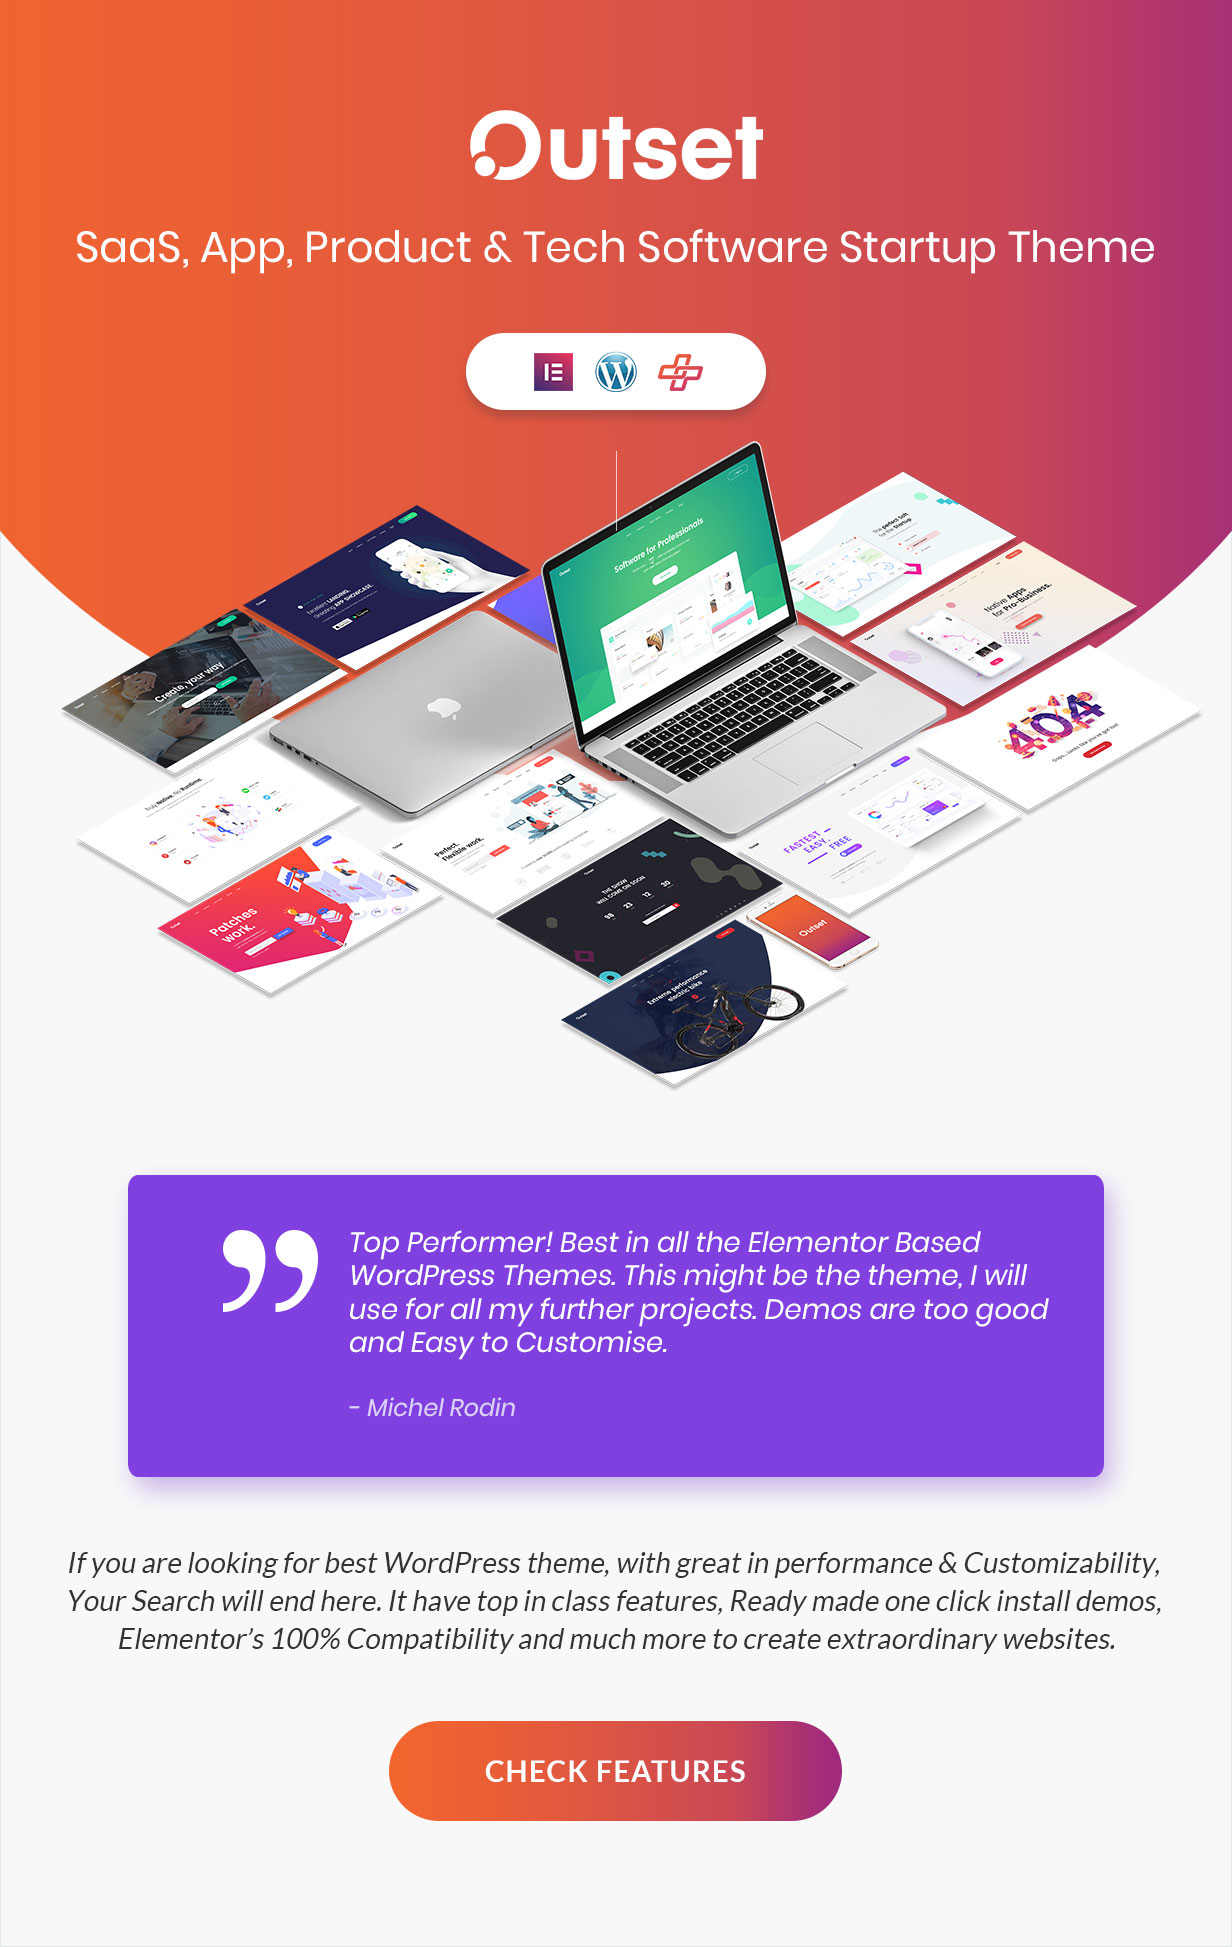 The Outset - SaaS, App, Product & Tech Software Startup Theme - 1